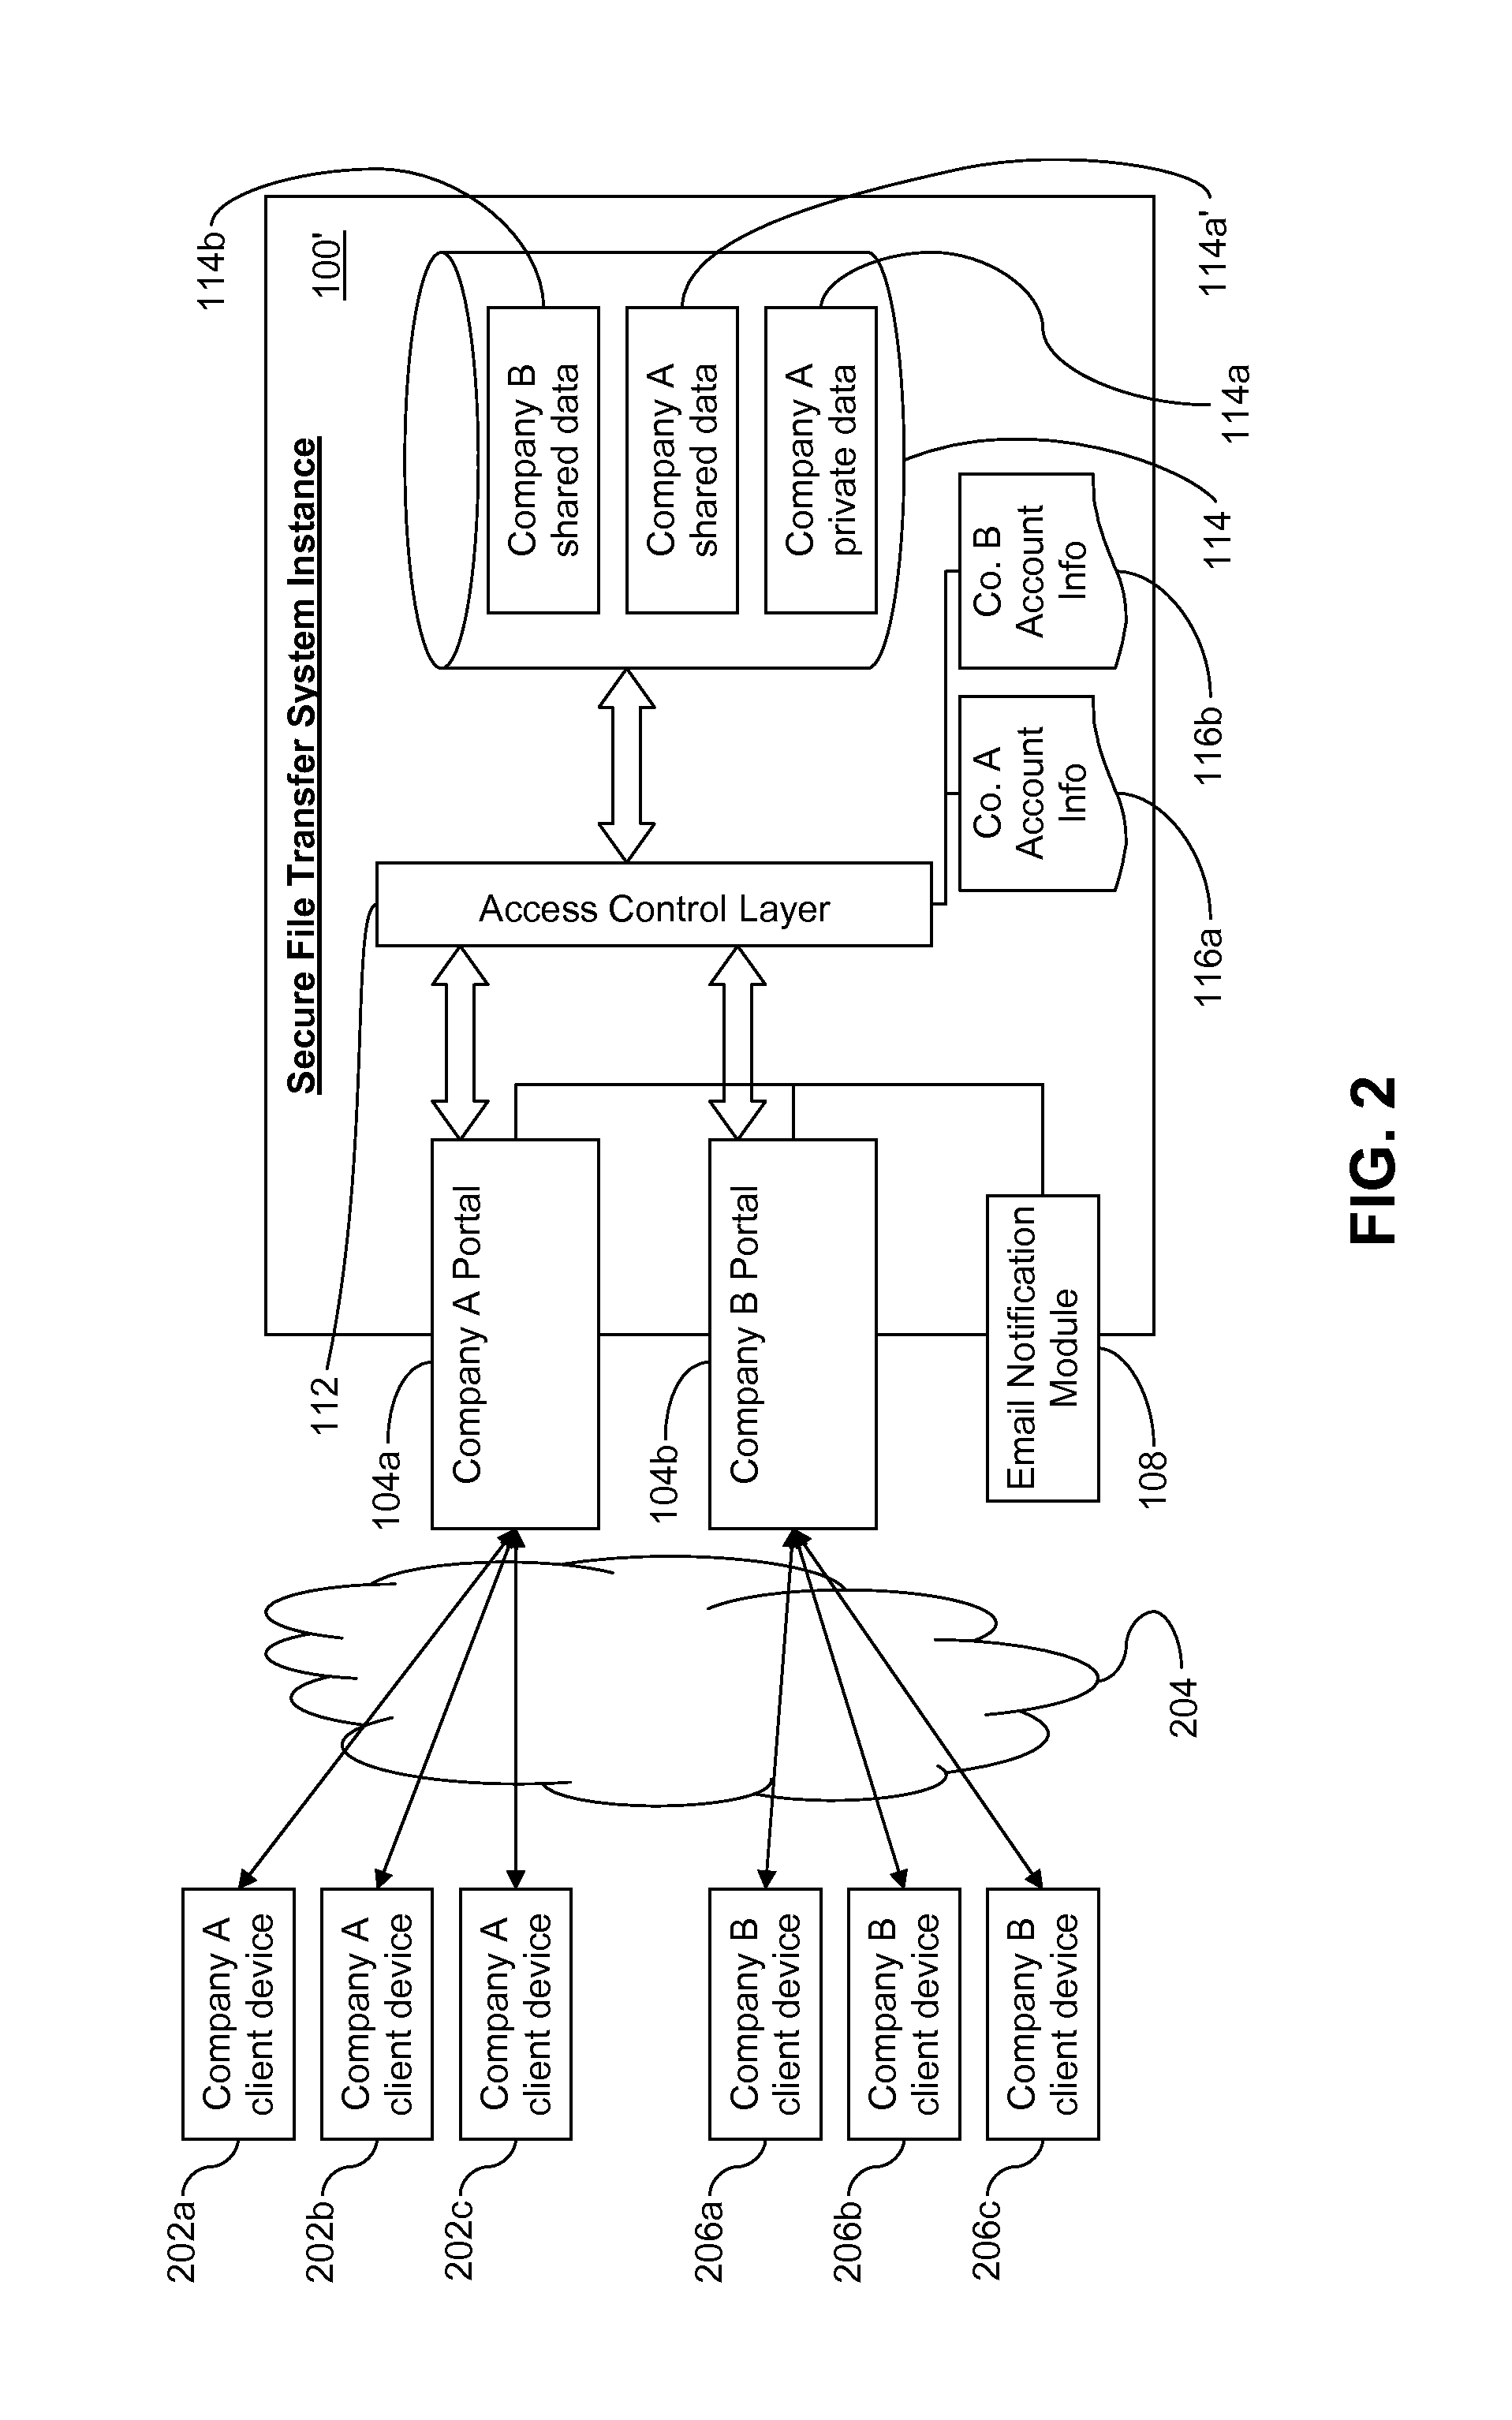 Secure file transfer systems and methods